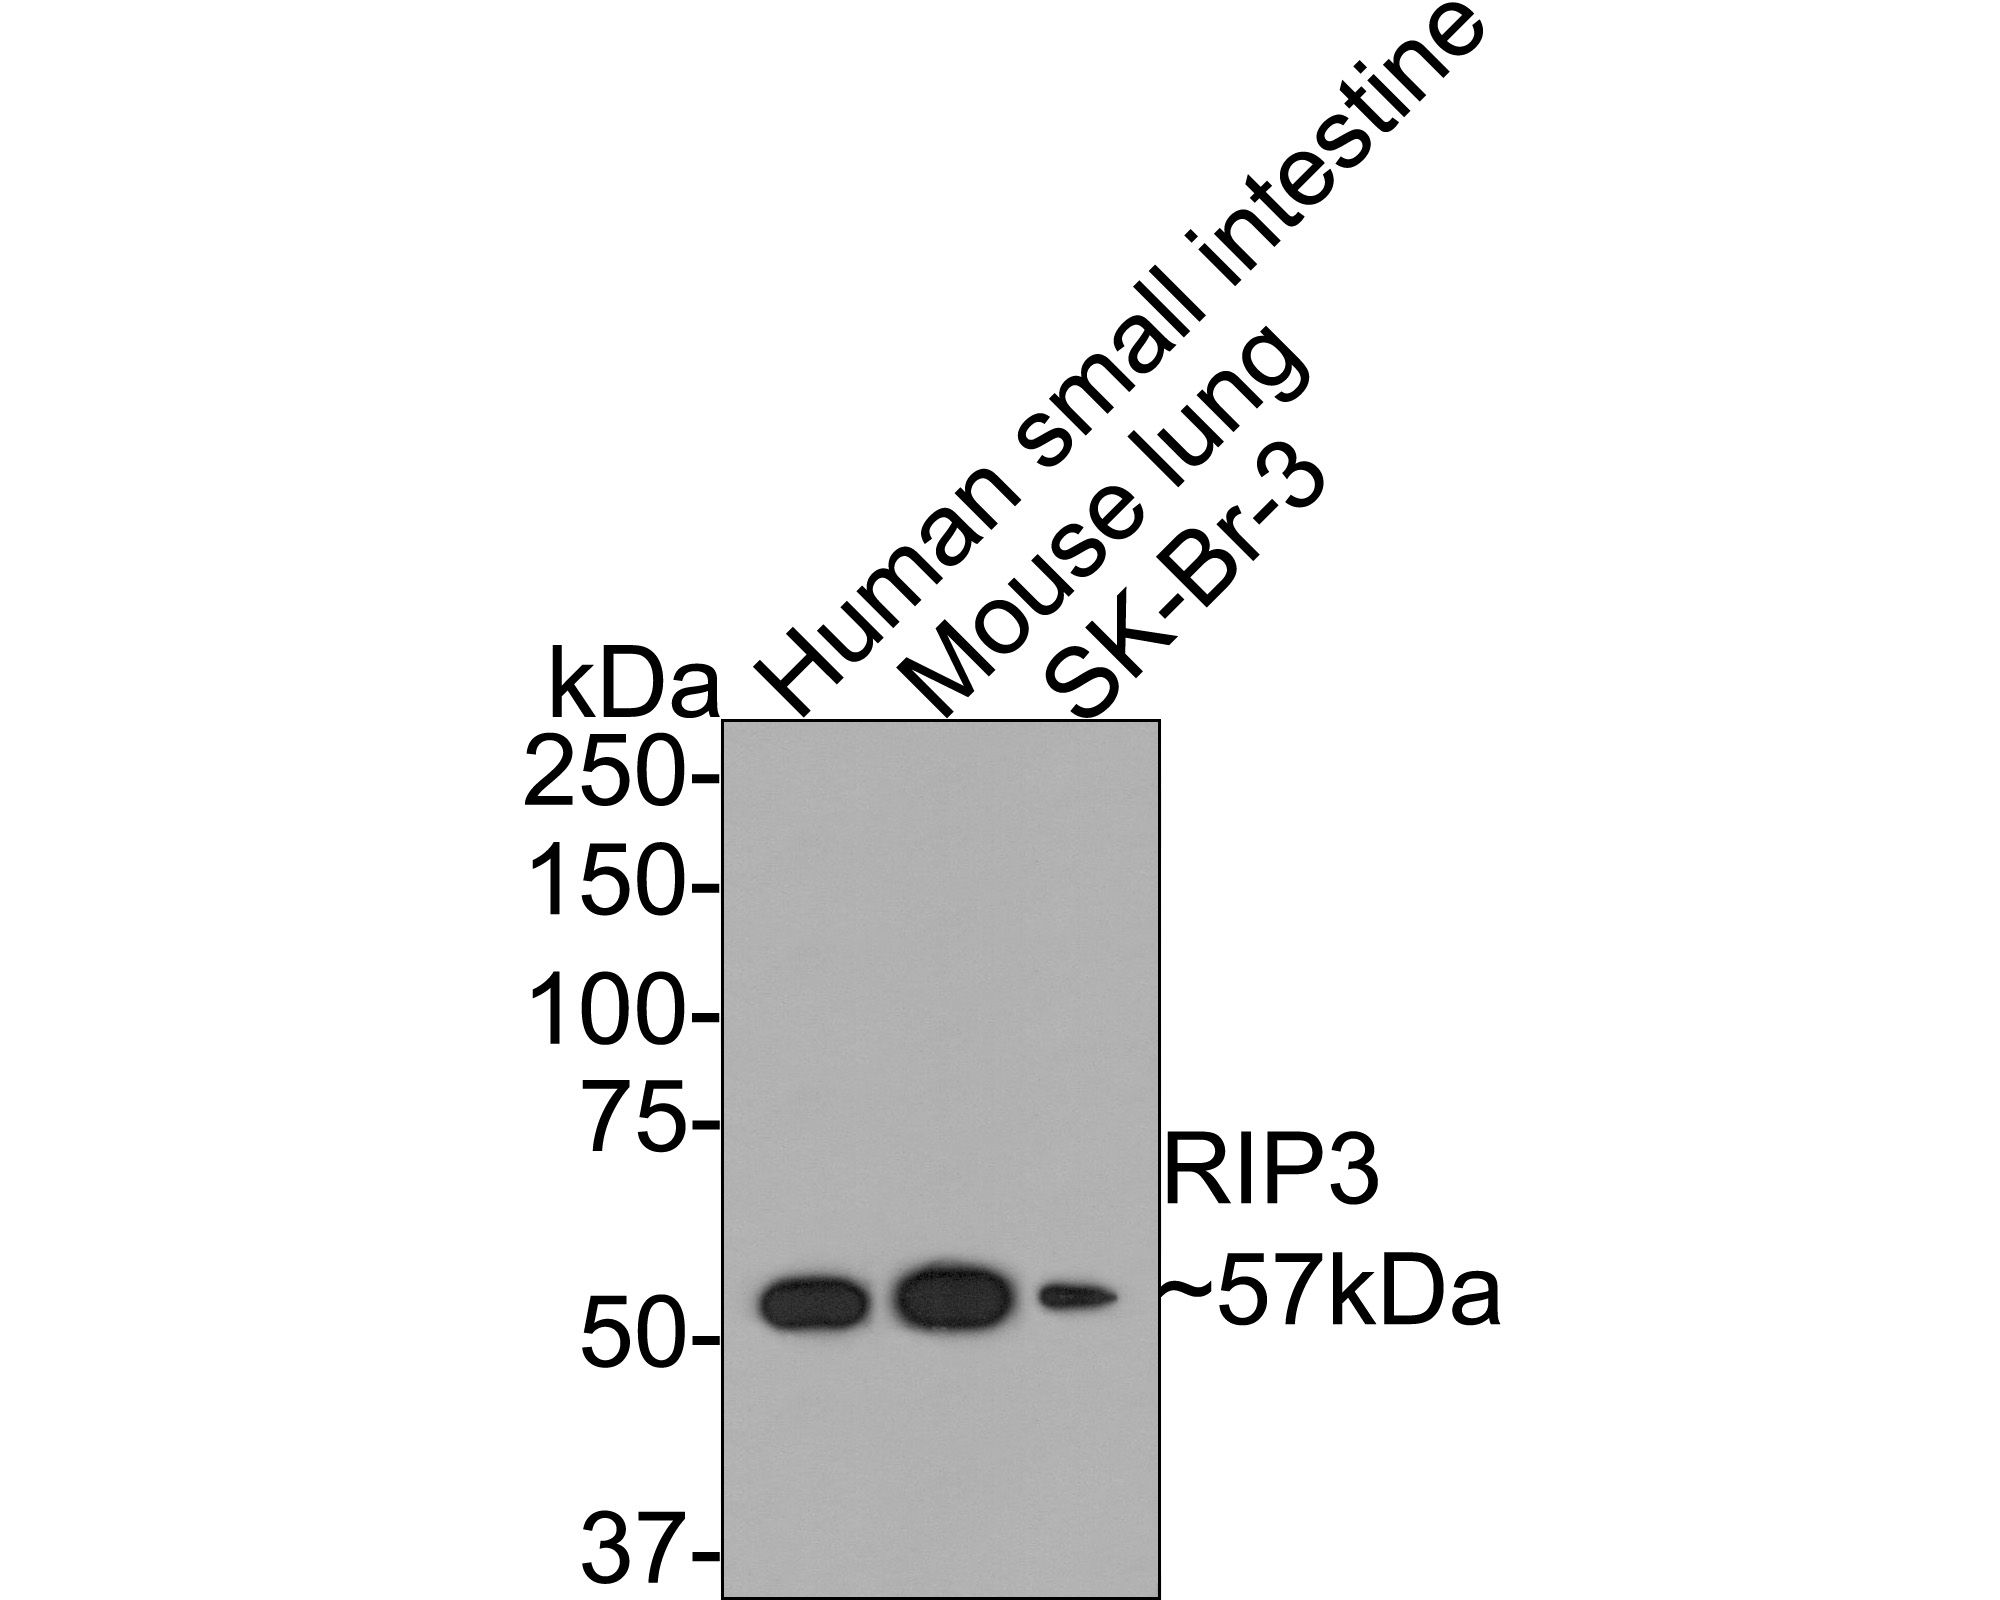 Western blot analysis of RIP3 on mouse lung tissue lysate. Proteins were transferred to a PVDF membrane and blocked with 5% BSA in PBS for 1 hour at room temperature. The primary antibody was used at a 1:500 dilution in 5% BSA at room temperature for 2 hours. Goat Anti-Rabbit IgG - HRP Secondary Antibody (HA1001) at 1:5,000 dilution was used for 1 hour at room temperature.